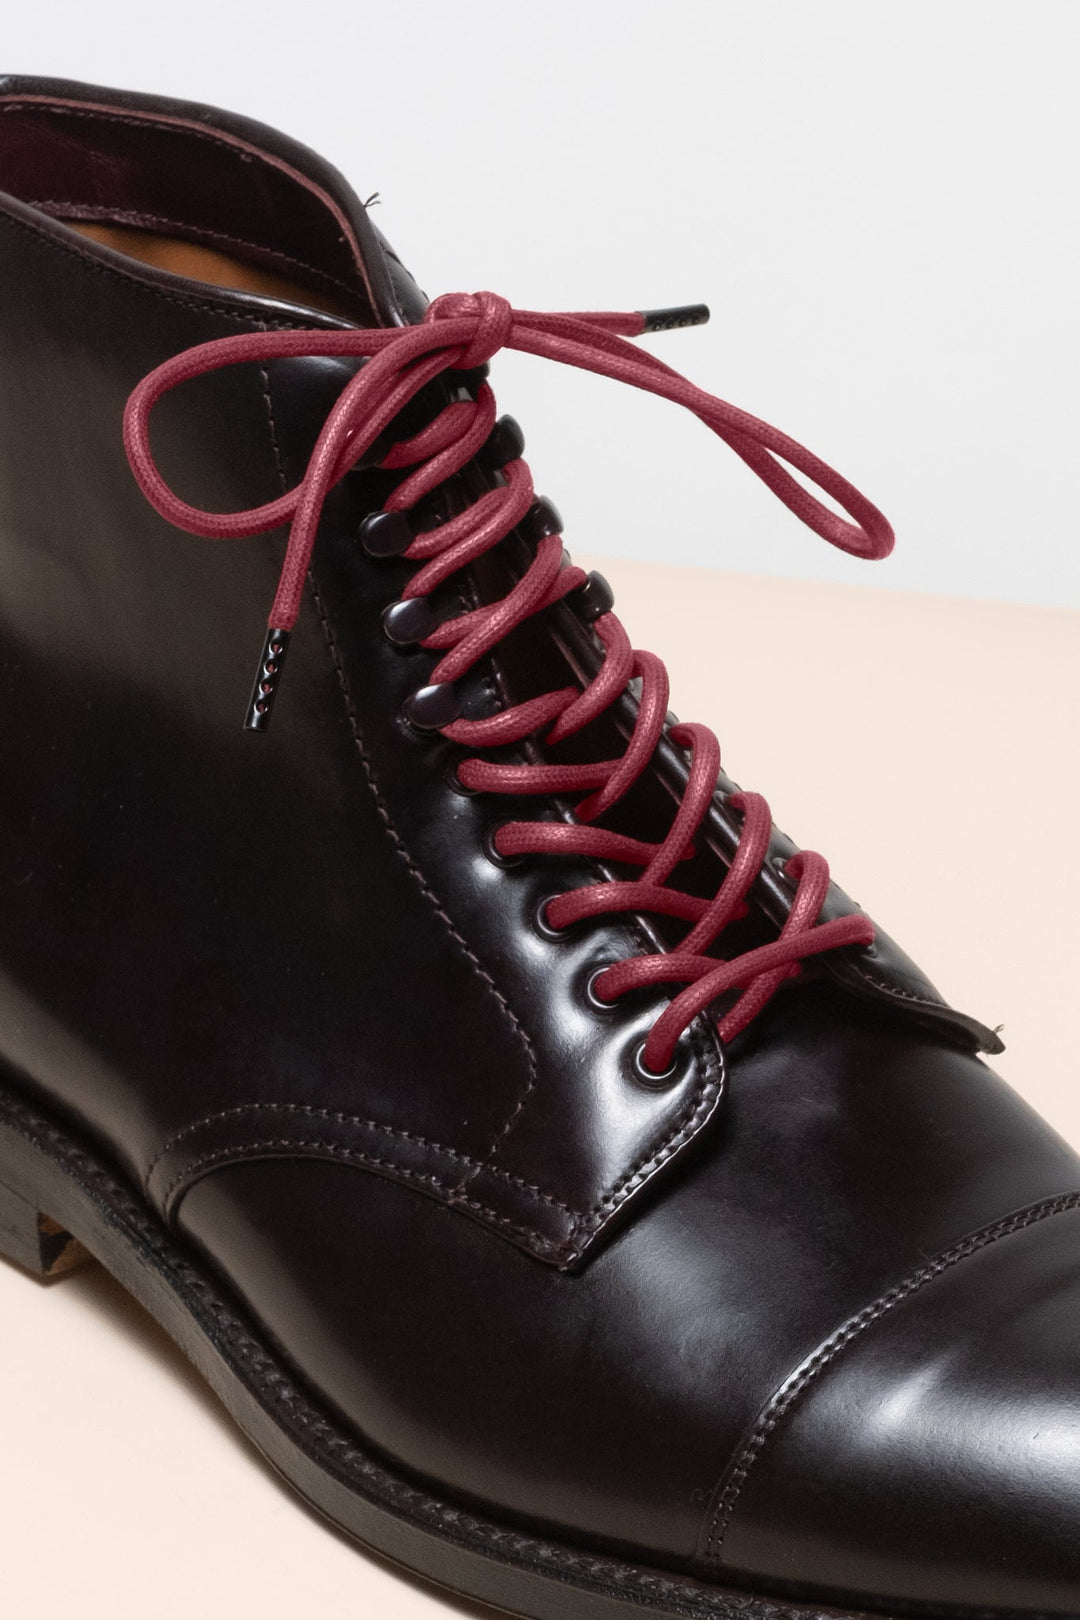 Buy Fine Leather Shoelaces in 3 Colours online at SENKELS